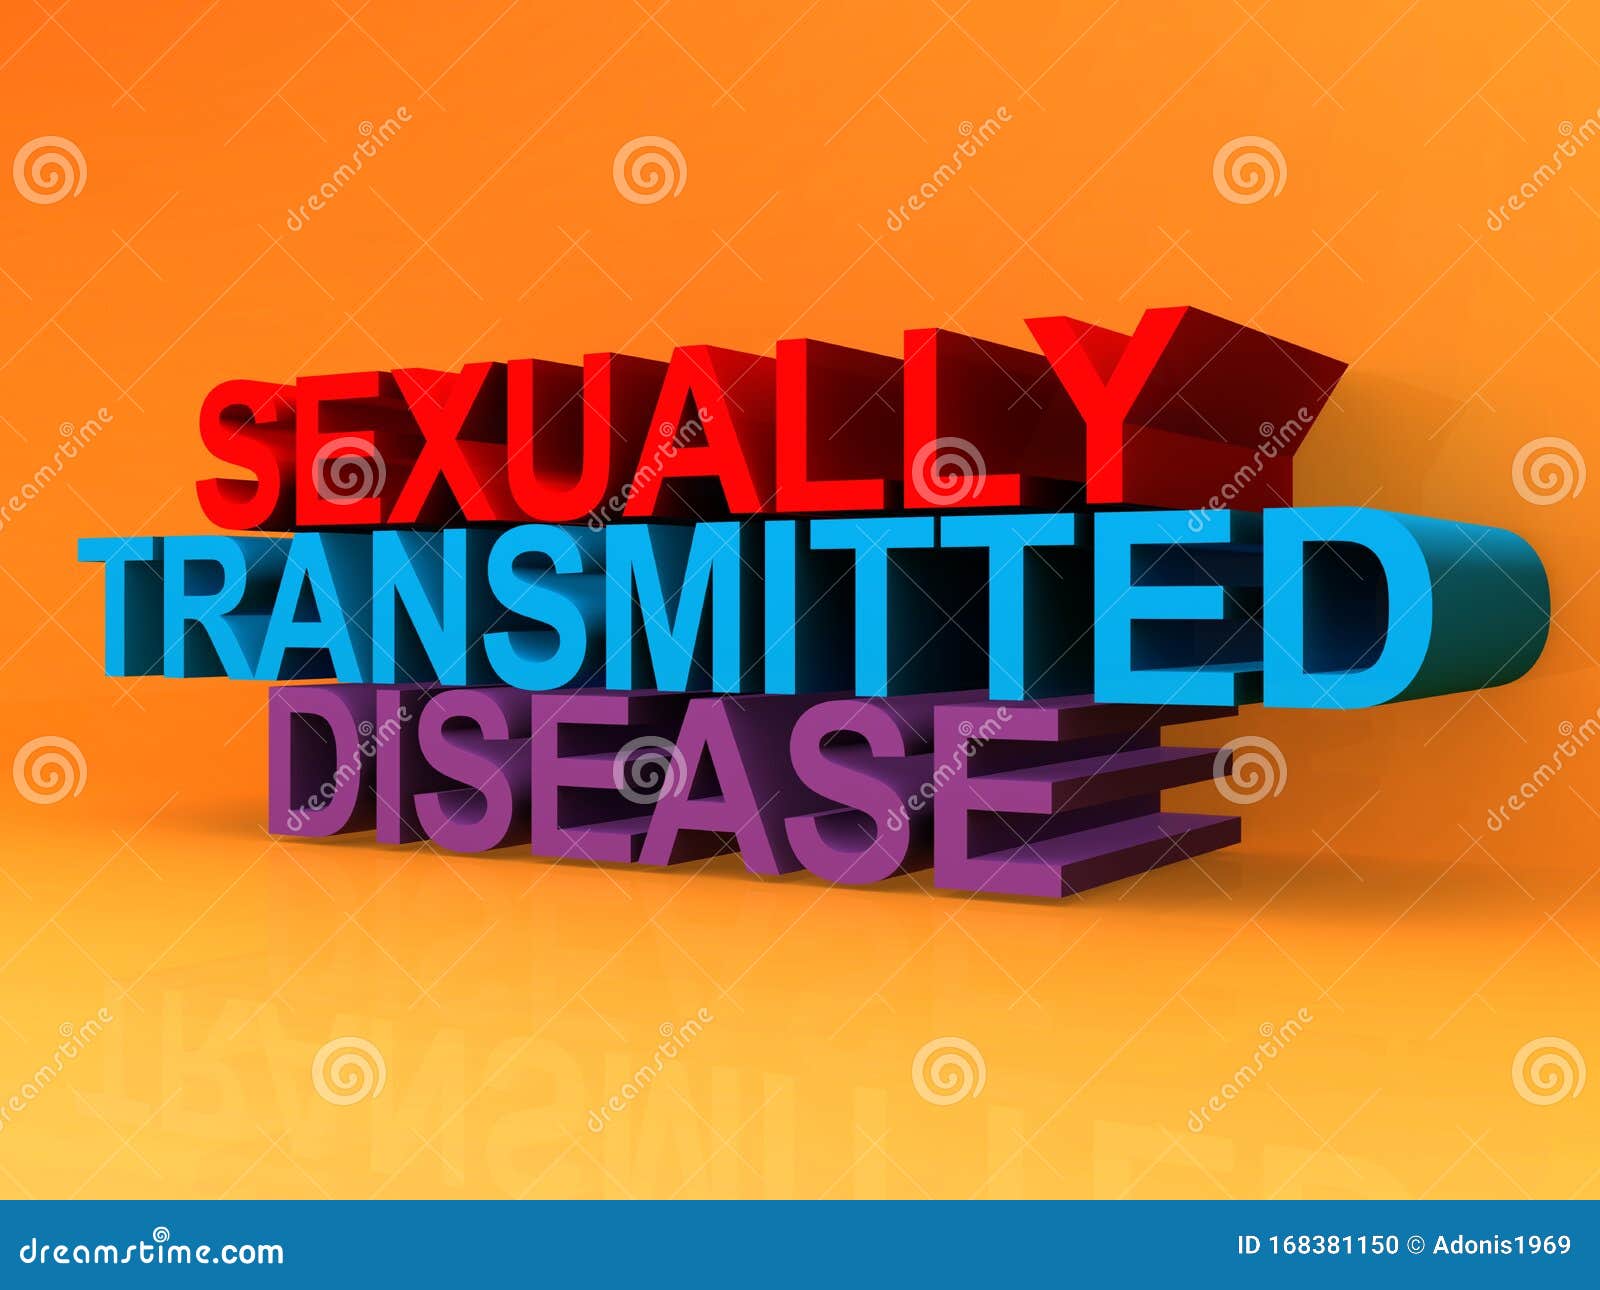 Sexually Transmitted Disease Stock Illustration Illustration Of